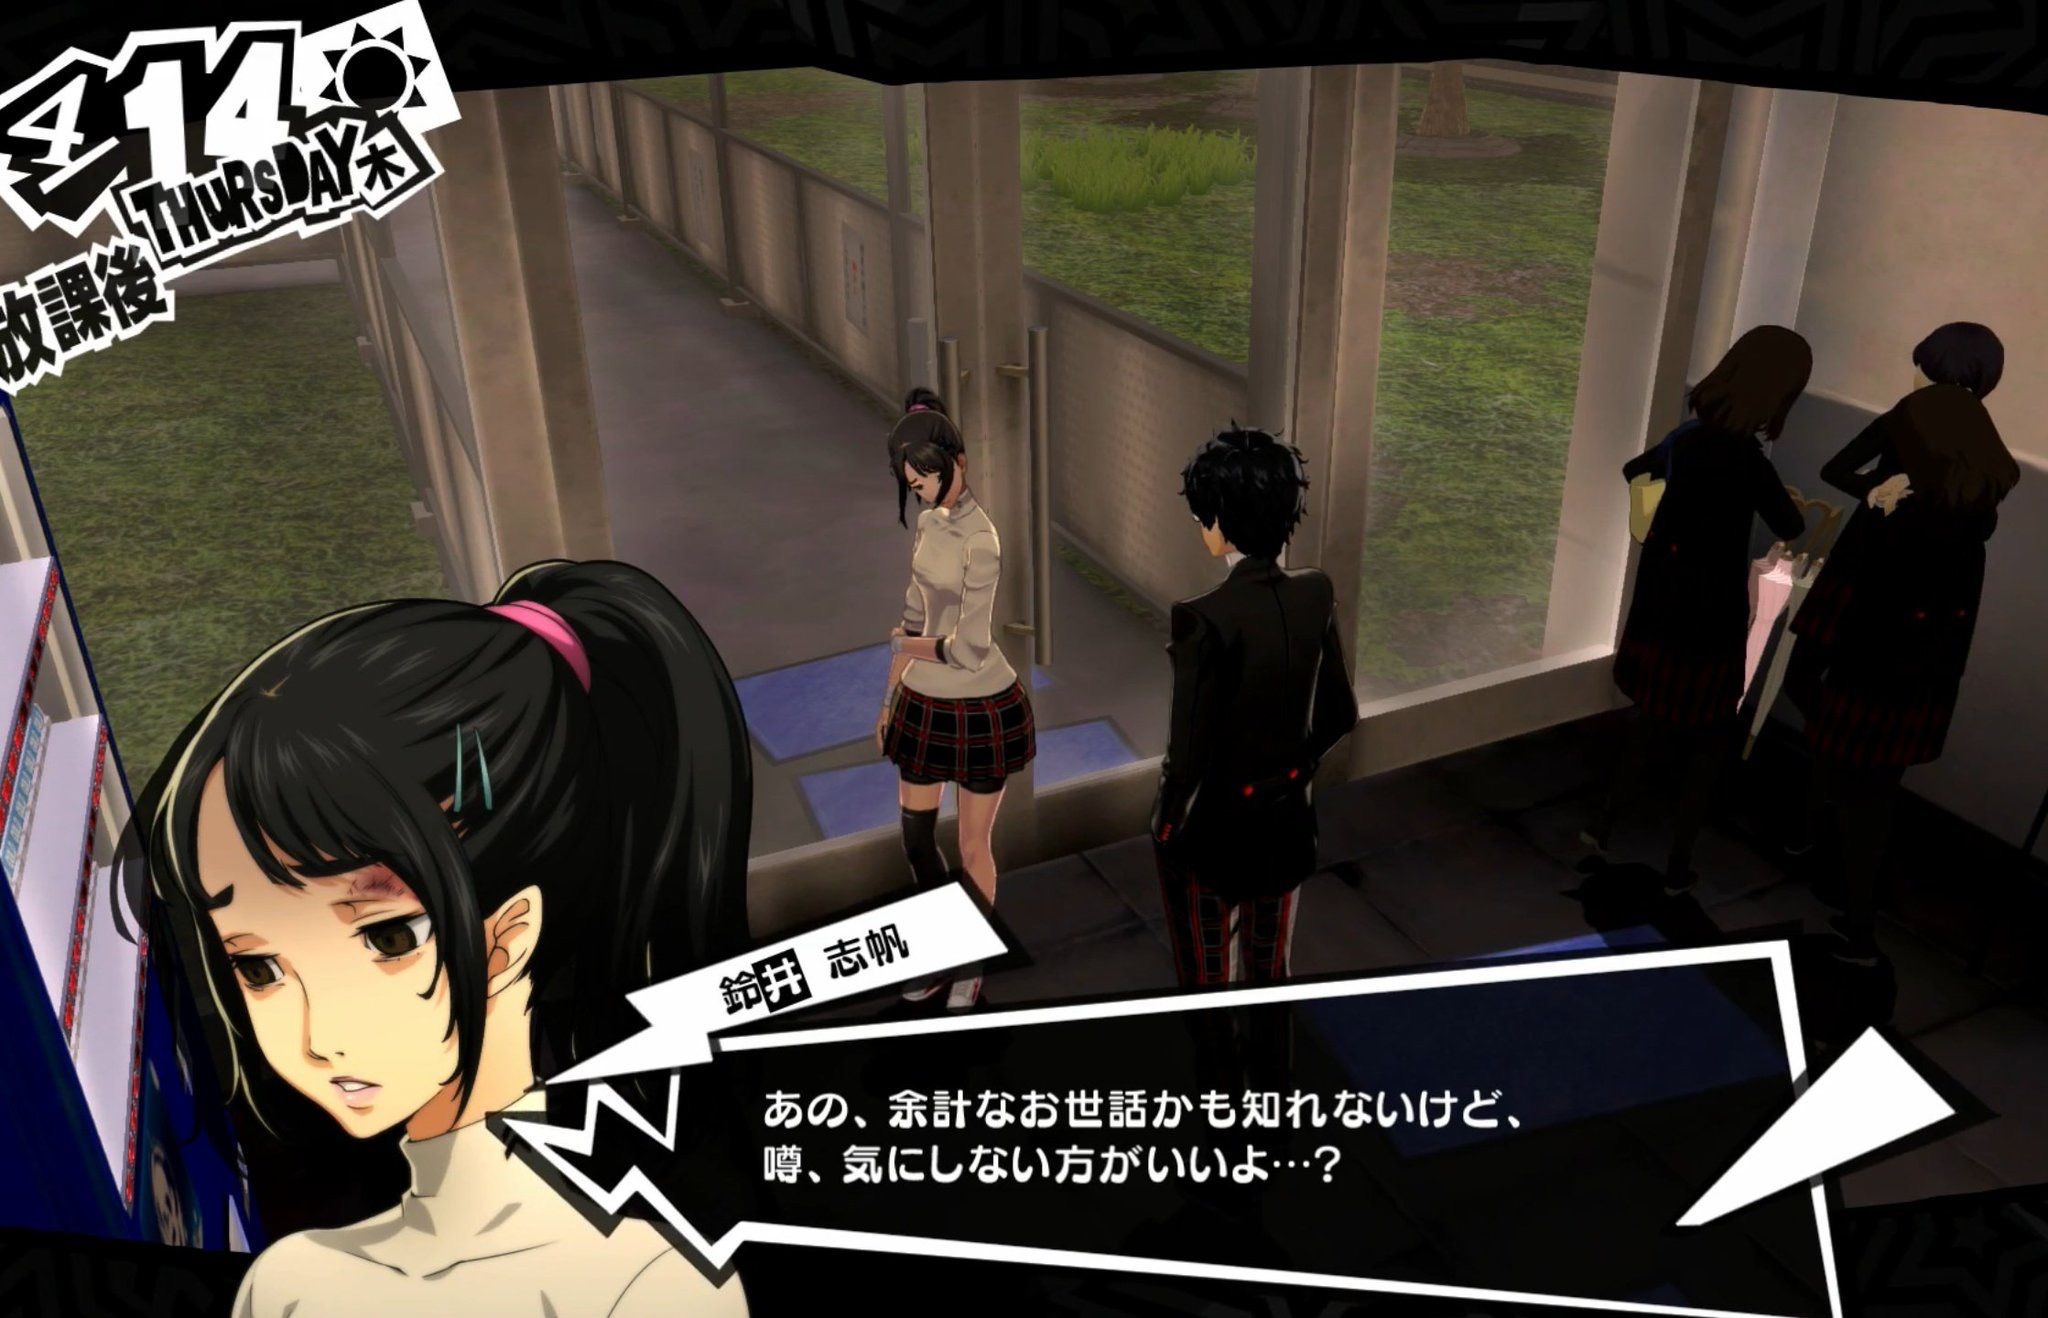 [Sad news] the fact that the first enemy of persona 5 is a physical education teacher who is going to rape a high school girl 8